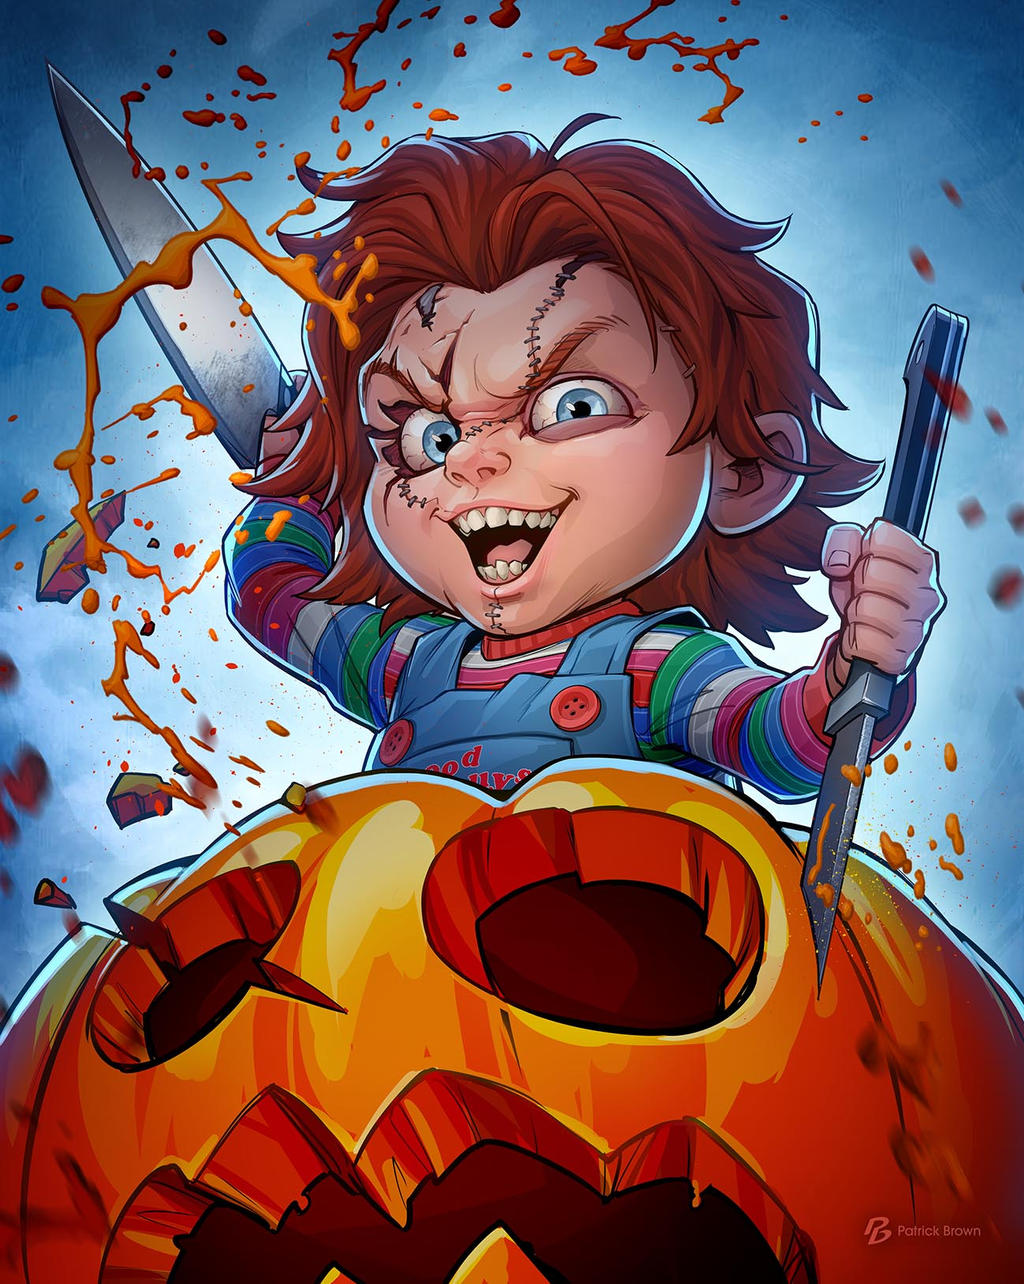 Chucky from Child's Play holding a knife and standing on a pumpkin. - Halloween